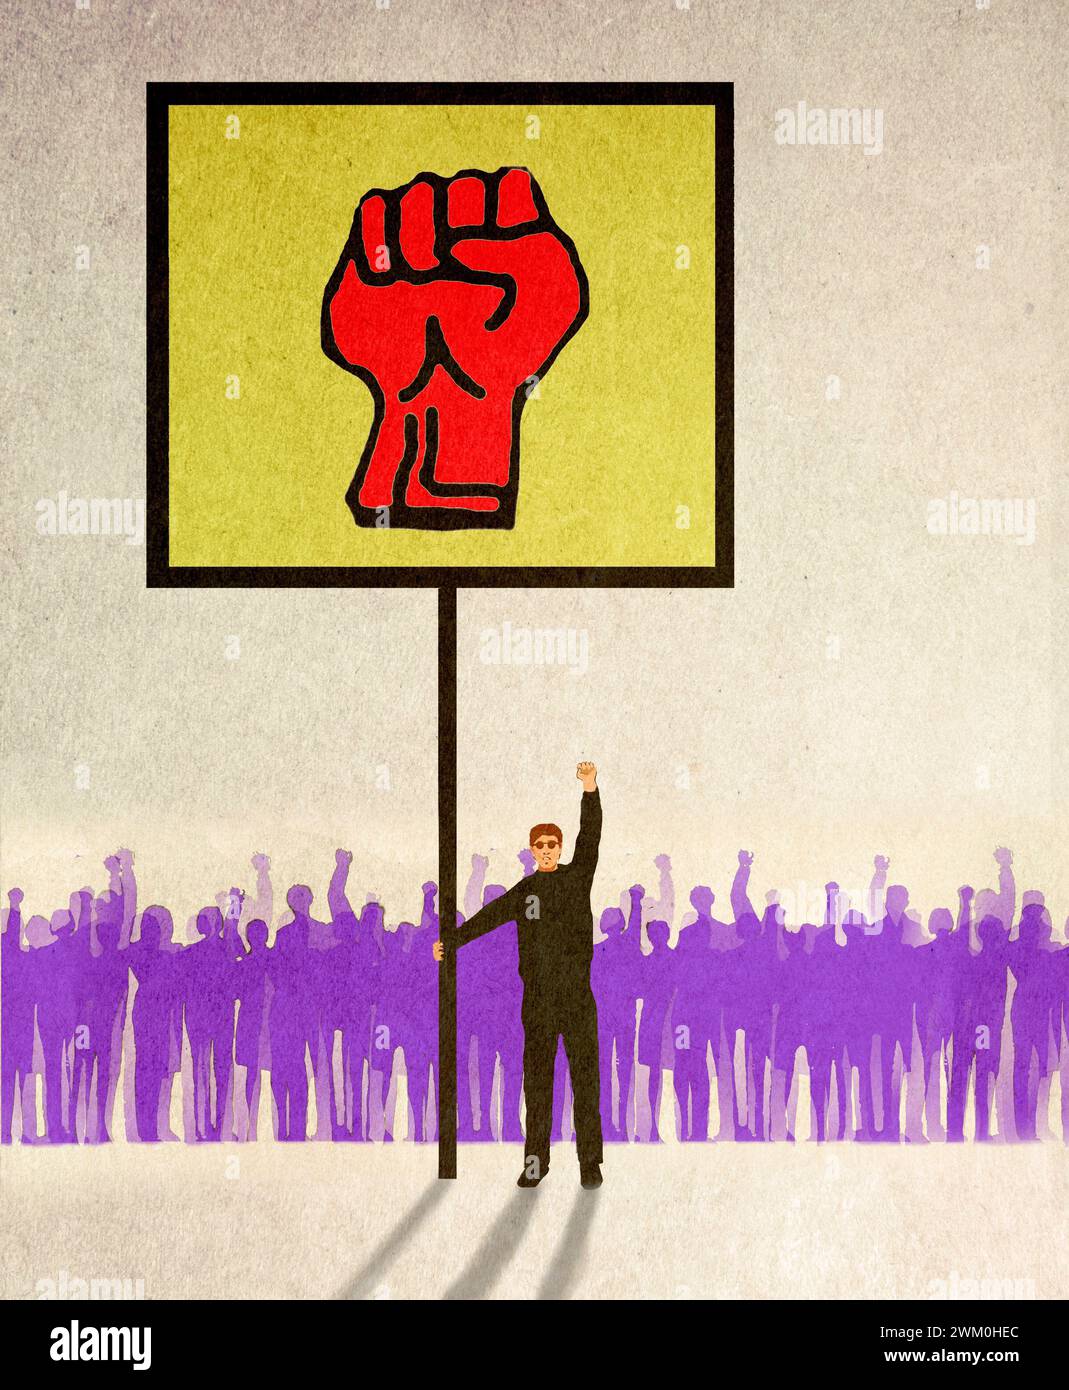 Man holding protest sign in front of protesters against beige background Stock Photo